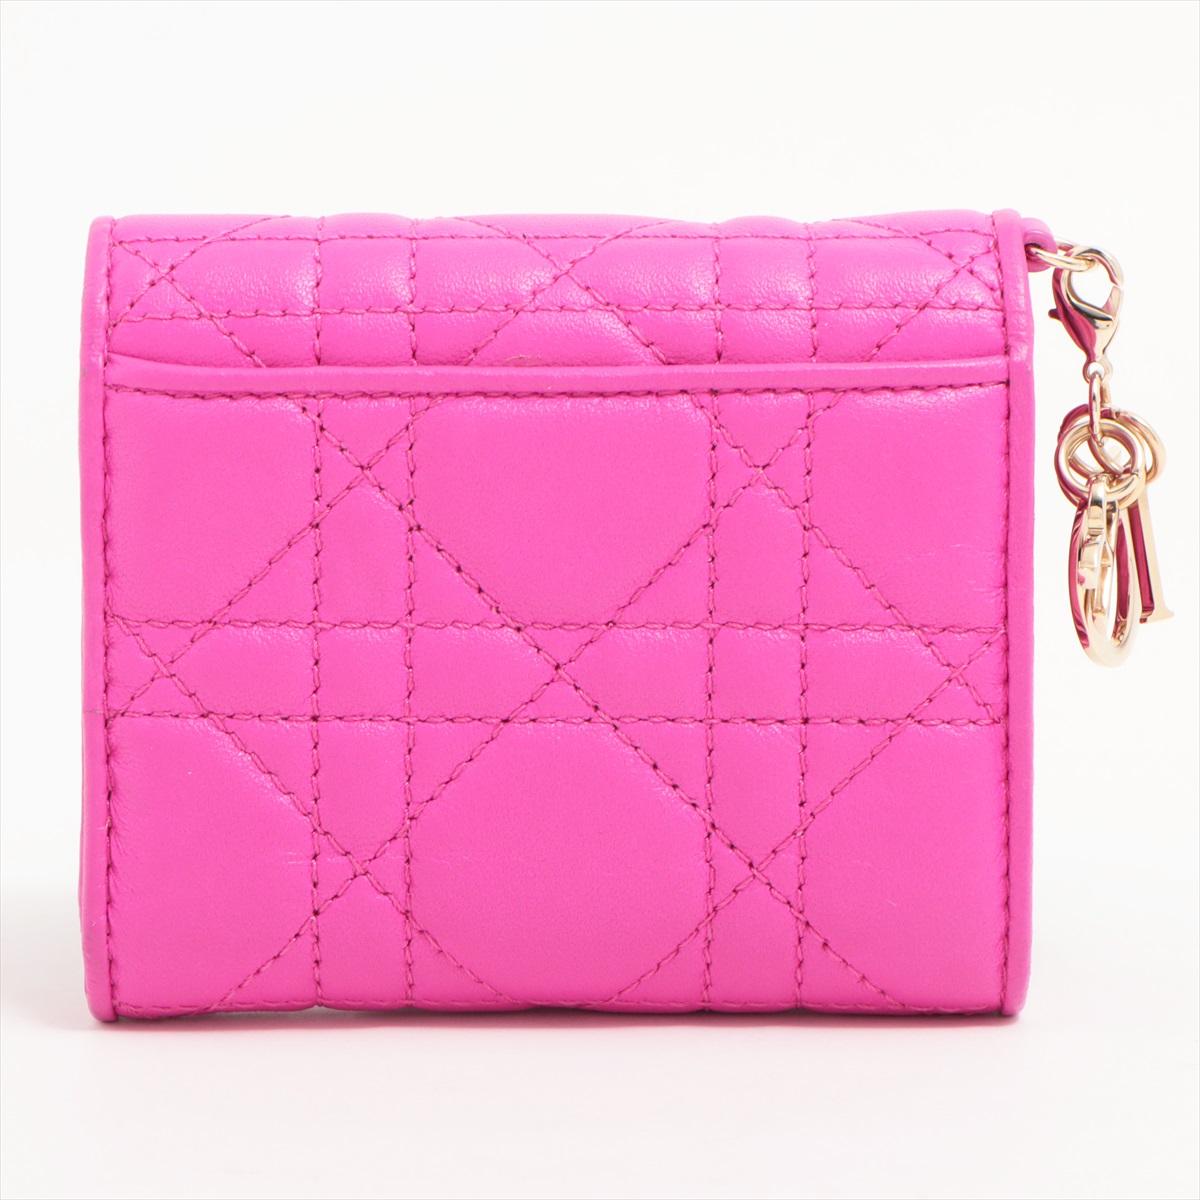 Dior Lady Dior Lotus Wallet Lambskin Wallet Pink In Good Condition For Sale In Indianapolis, IN